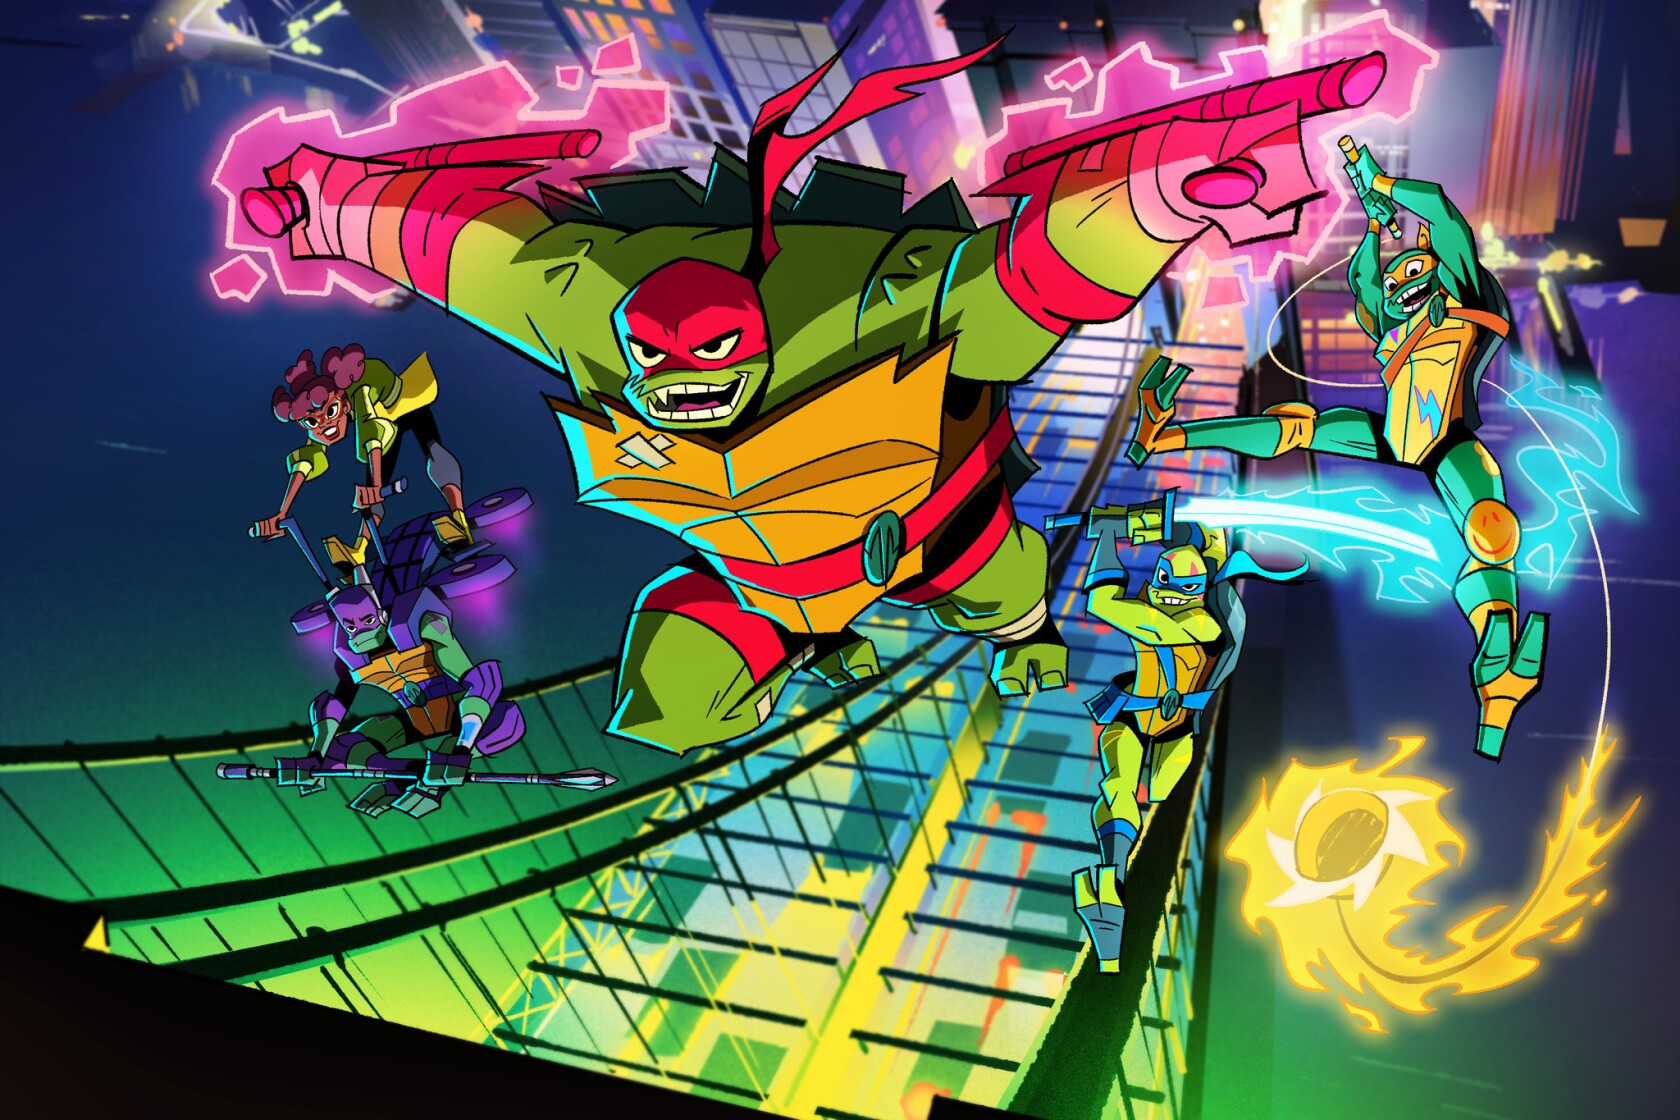 Get A First Look At The New Rise Of The Teenage Mutant Ninja Turtles 